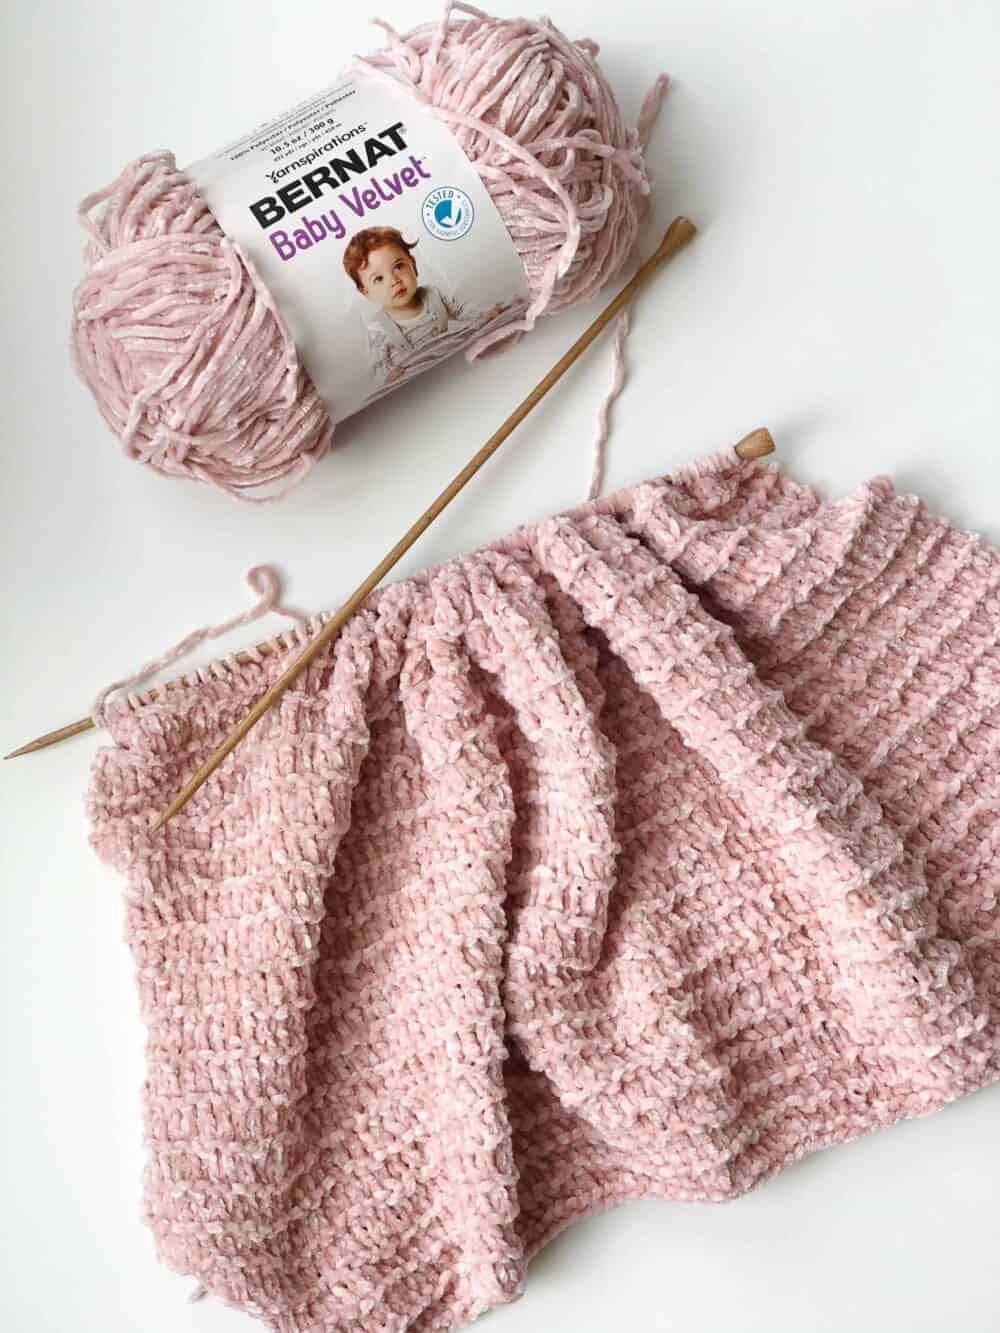 Crocheting and knitting doesn't only have to be for the fall and